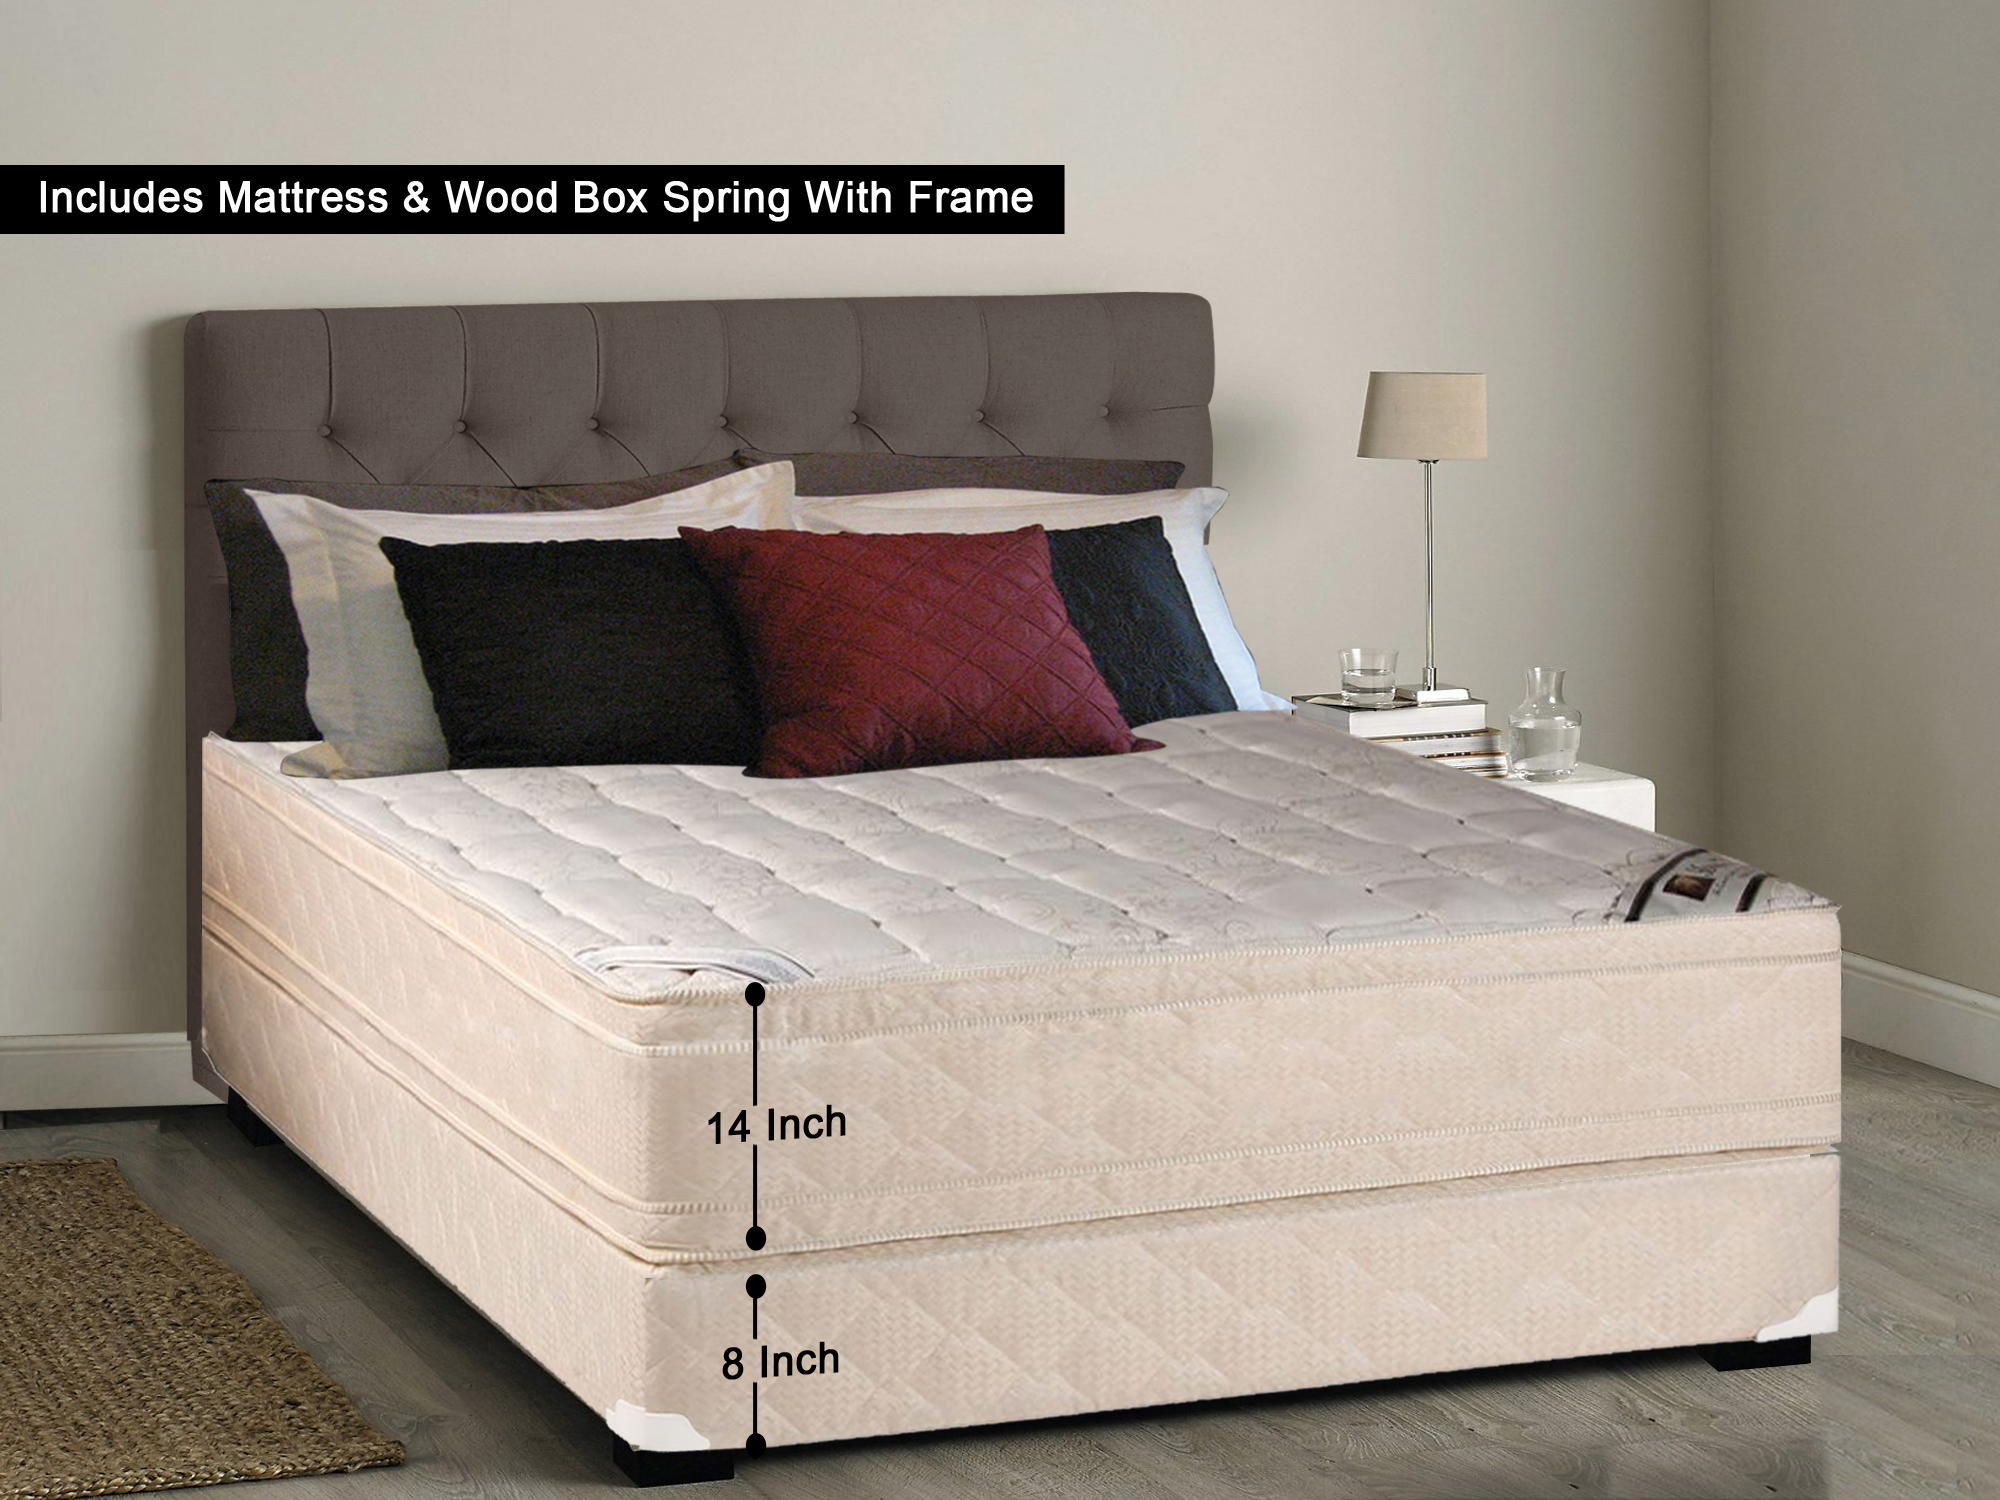 Queen Size Beige Mattress Solution Gentle Firm Tight top Innerspring 4 Low Profile Metal Box Spring//Foundation for Mattress Set